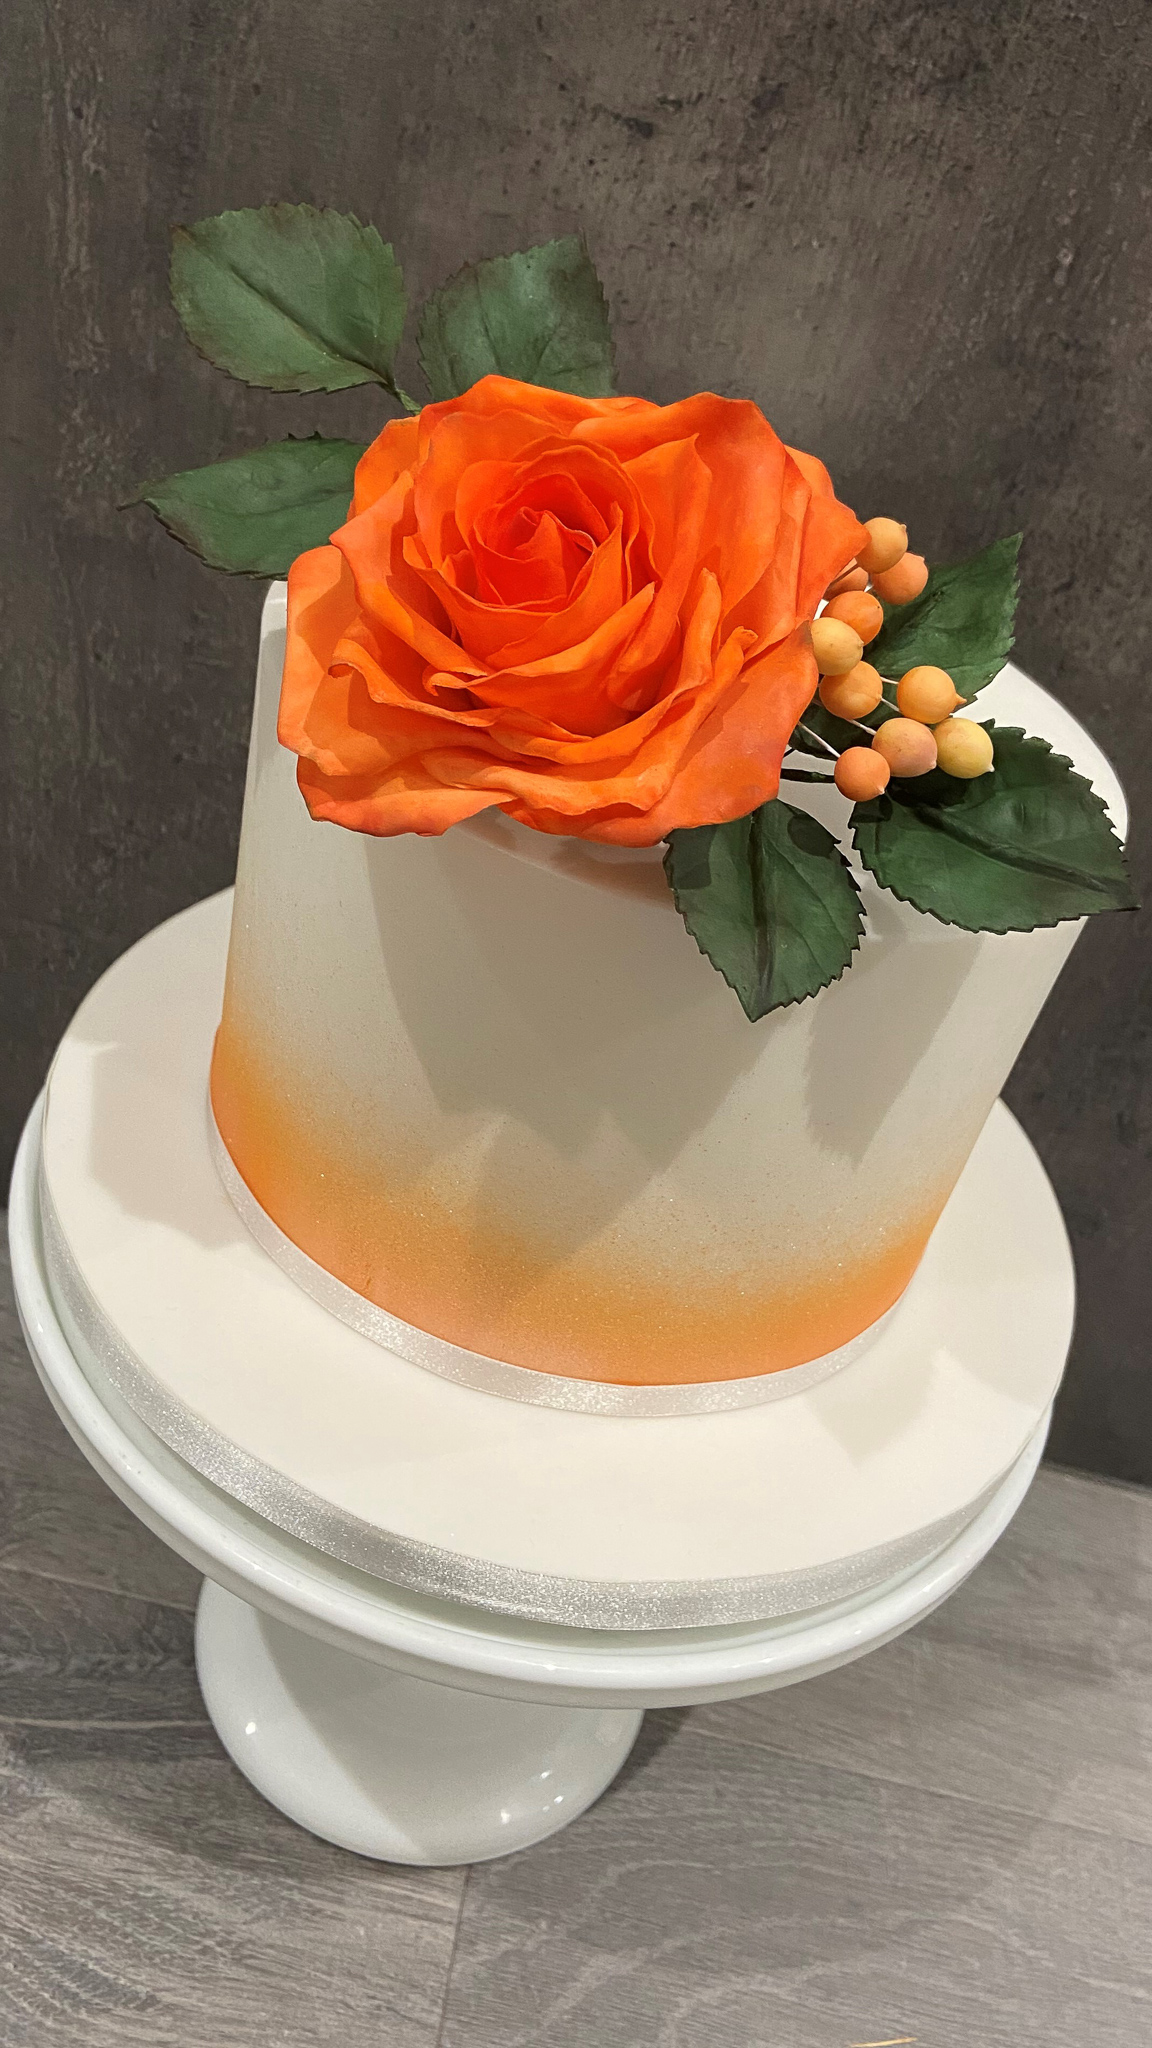 Burnt orange Ombre effect luxury cake with sugar rose and berries